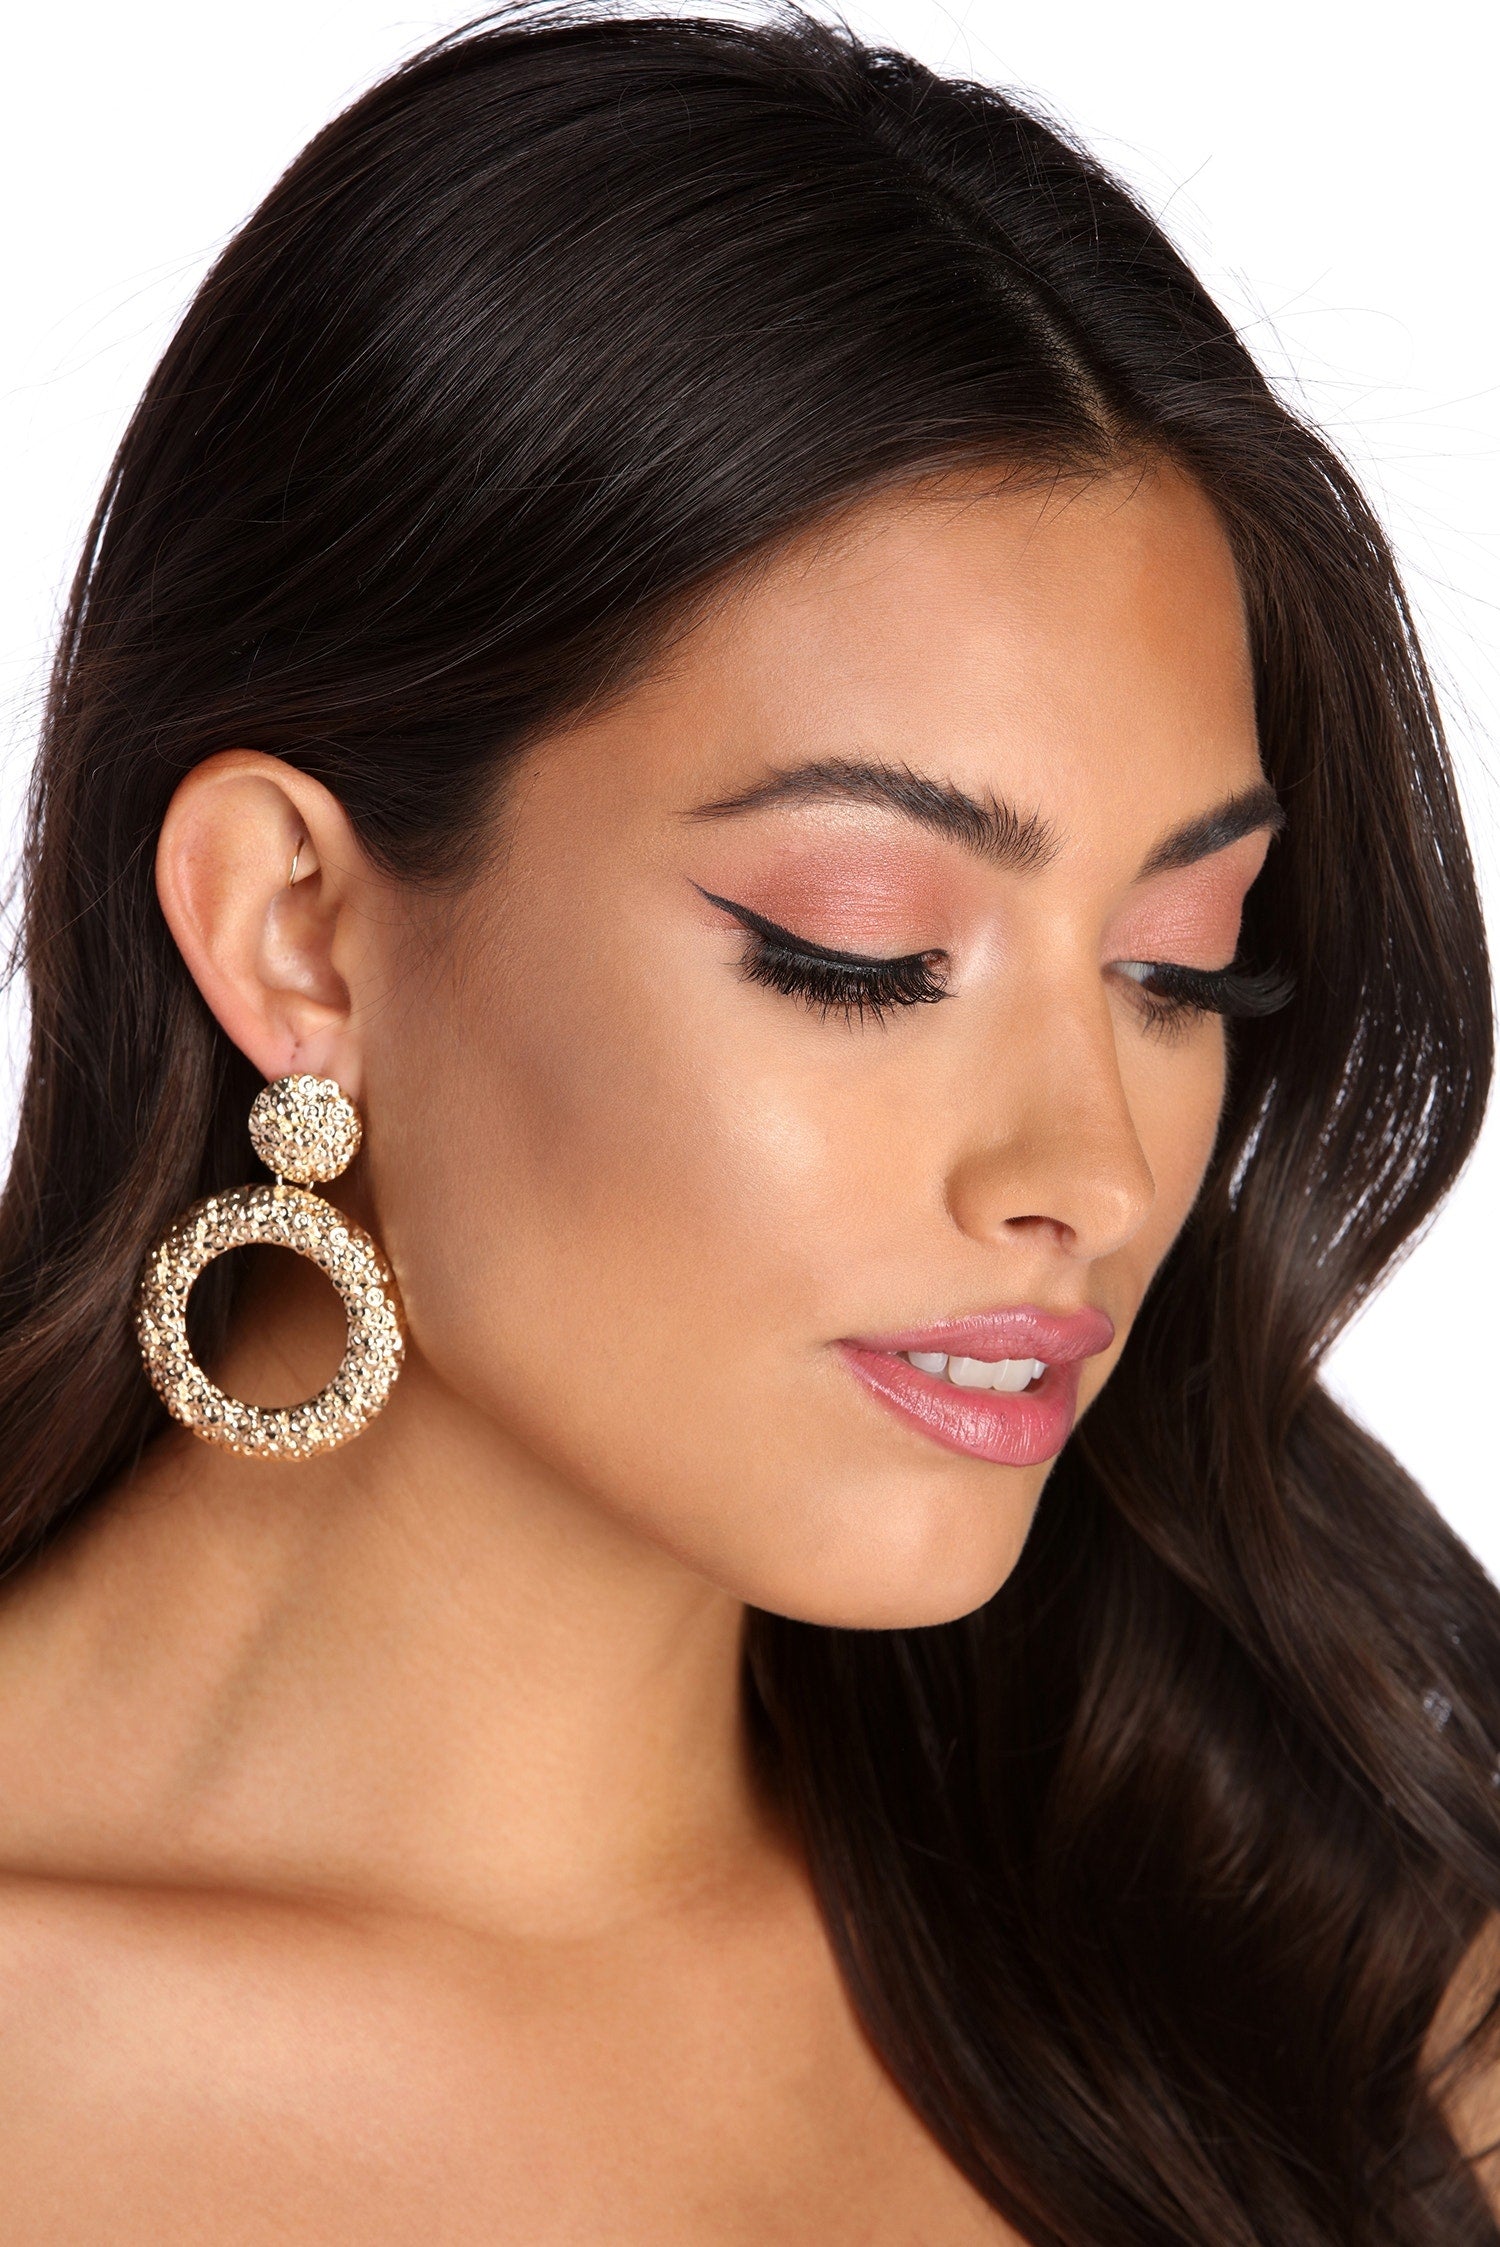 Glam It Up O-Ring Earrings